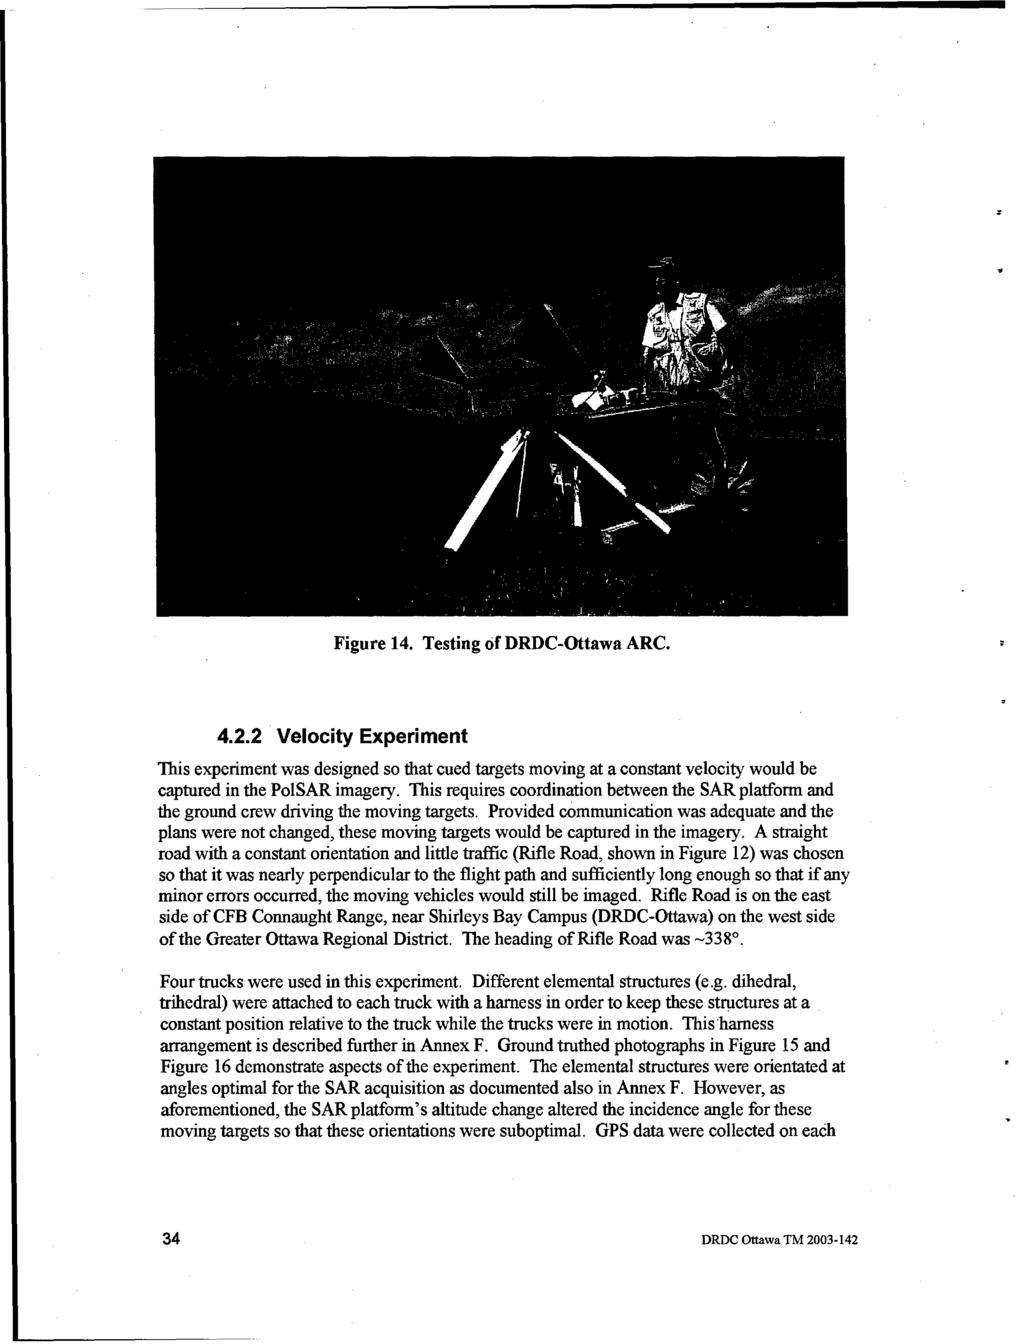 Figure 14. Testing of DRDC-Ottawa ARC. 4.2.2 Velocity Experiment This experiment was designed so that cued targets moving at a constant velocity would be captured in the PoISAR imagery.